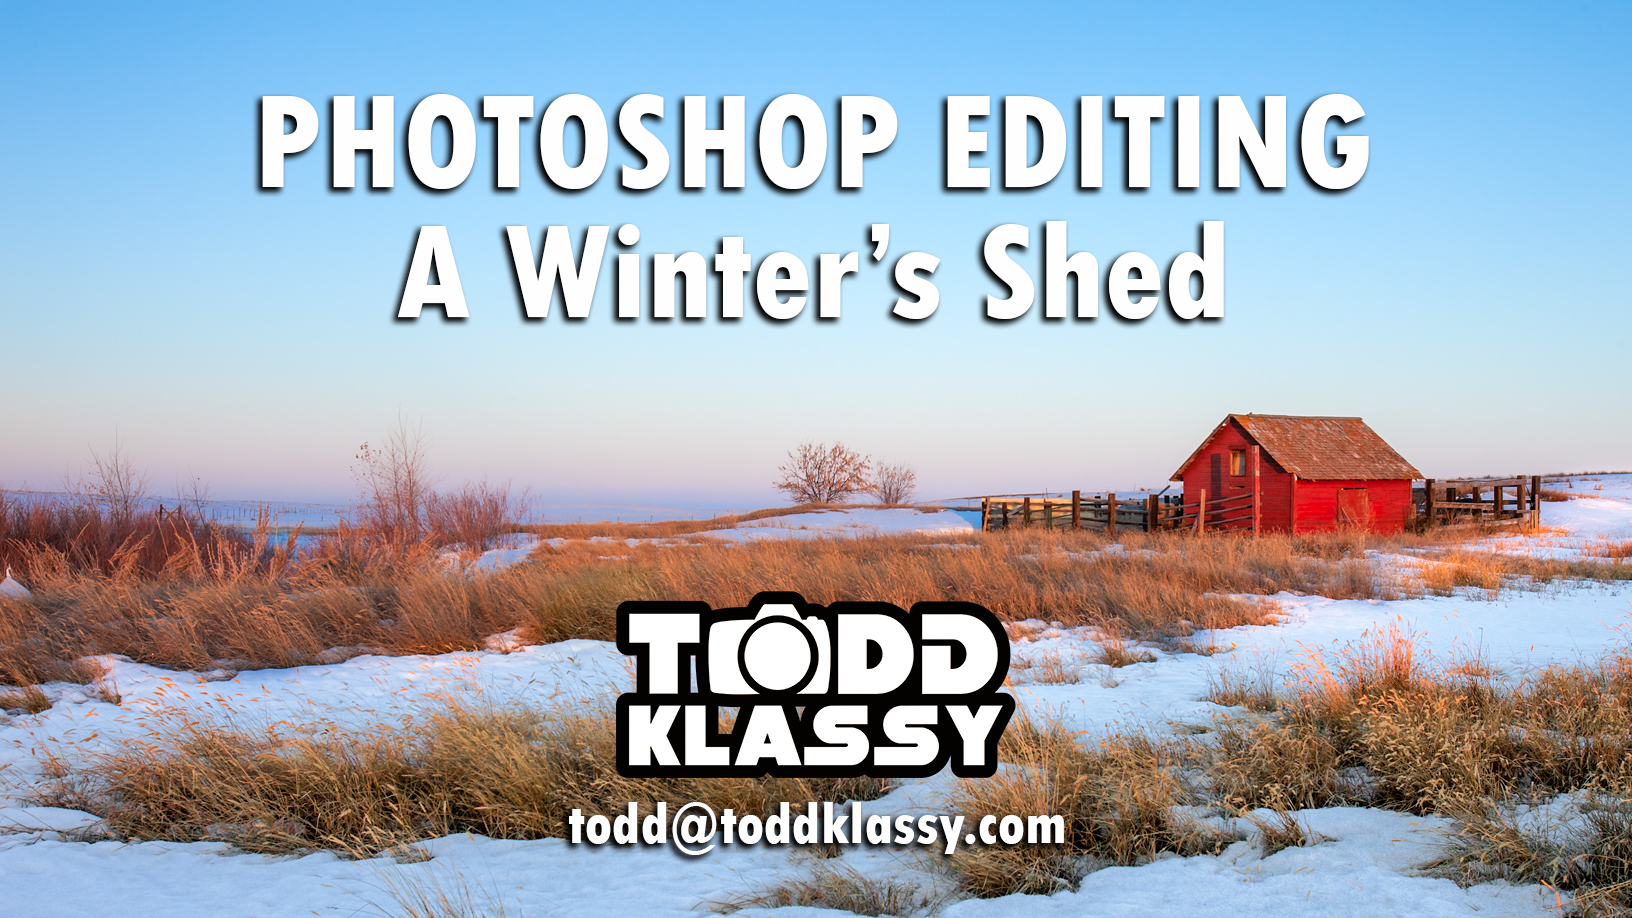 Photo editing with Photoshop #1: A Winter's Shed